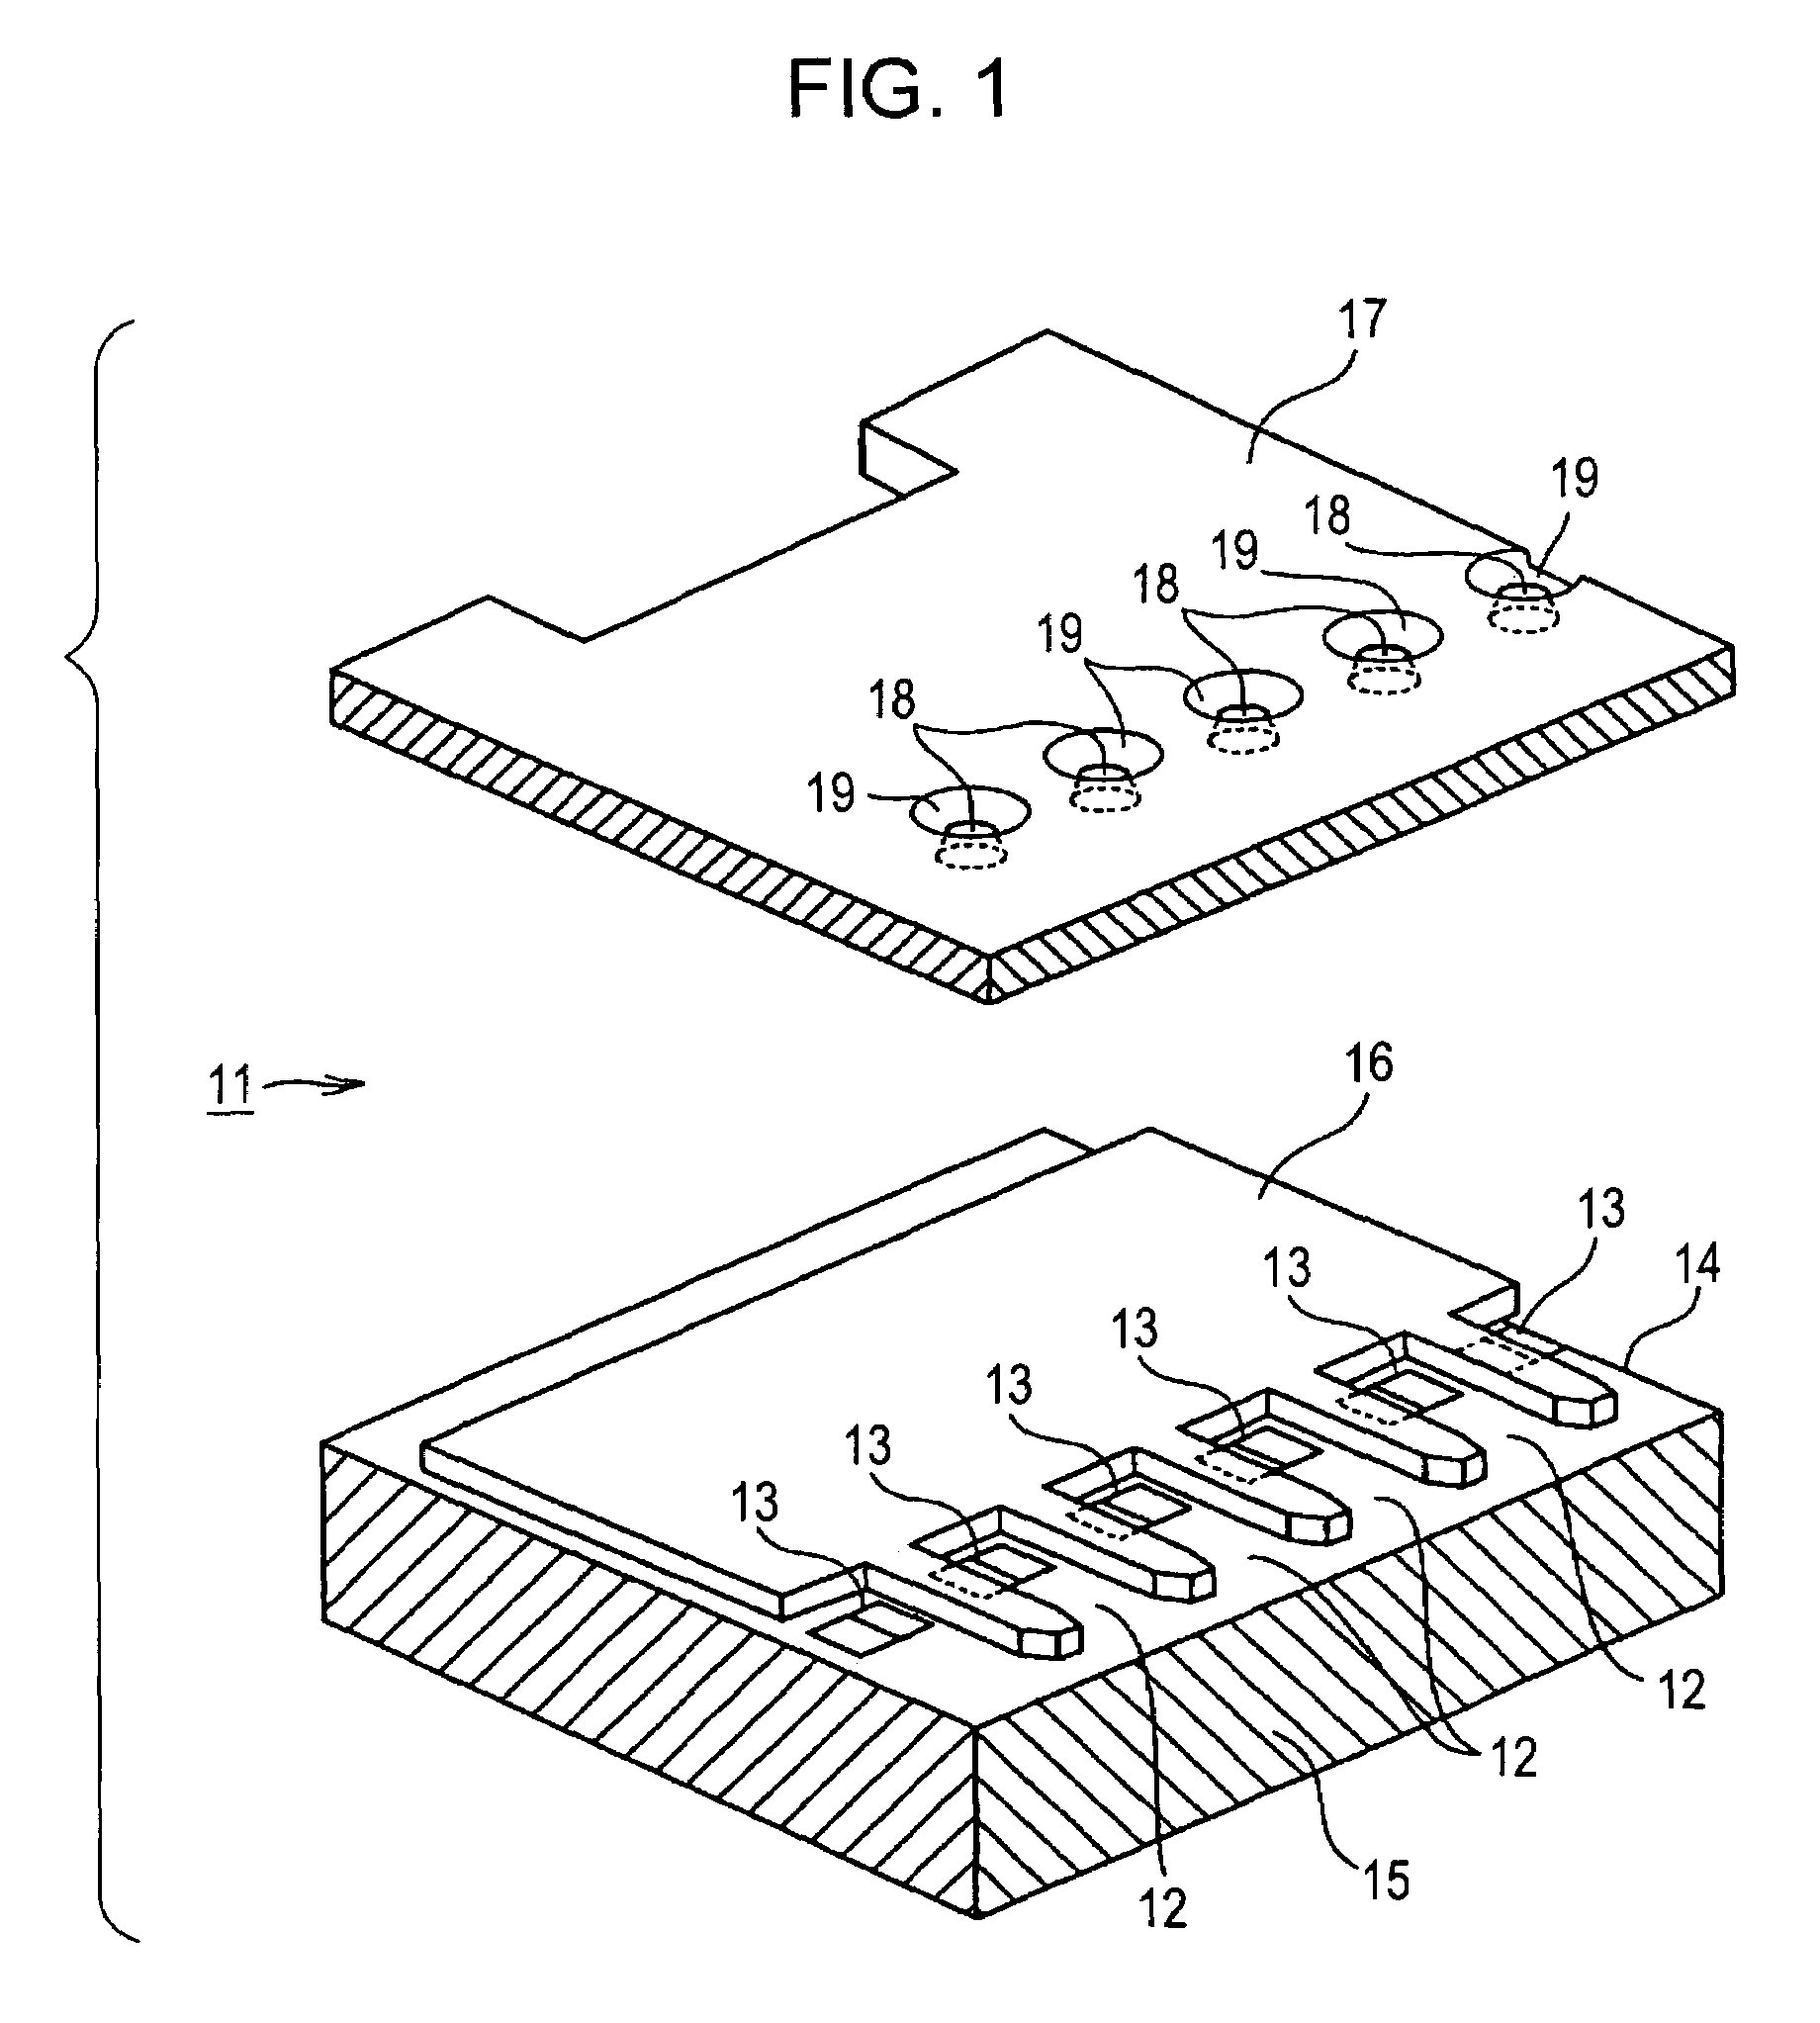 Liquid ejection head, liquid ejection apparatus, and method for fabricating liquid ejection head